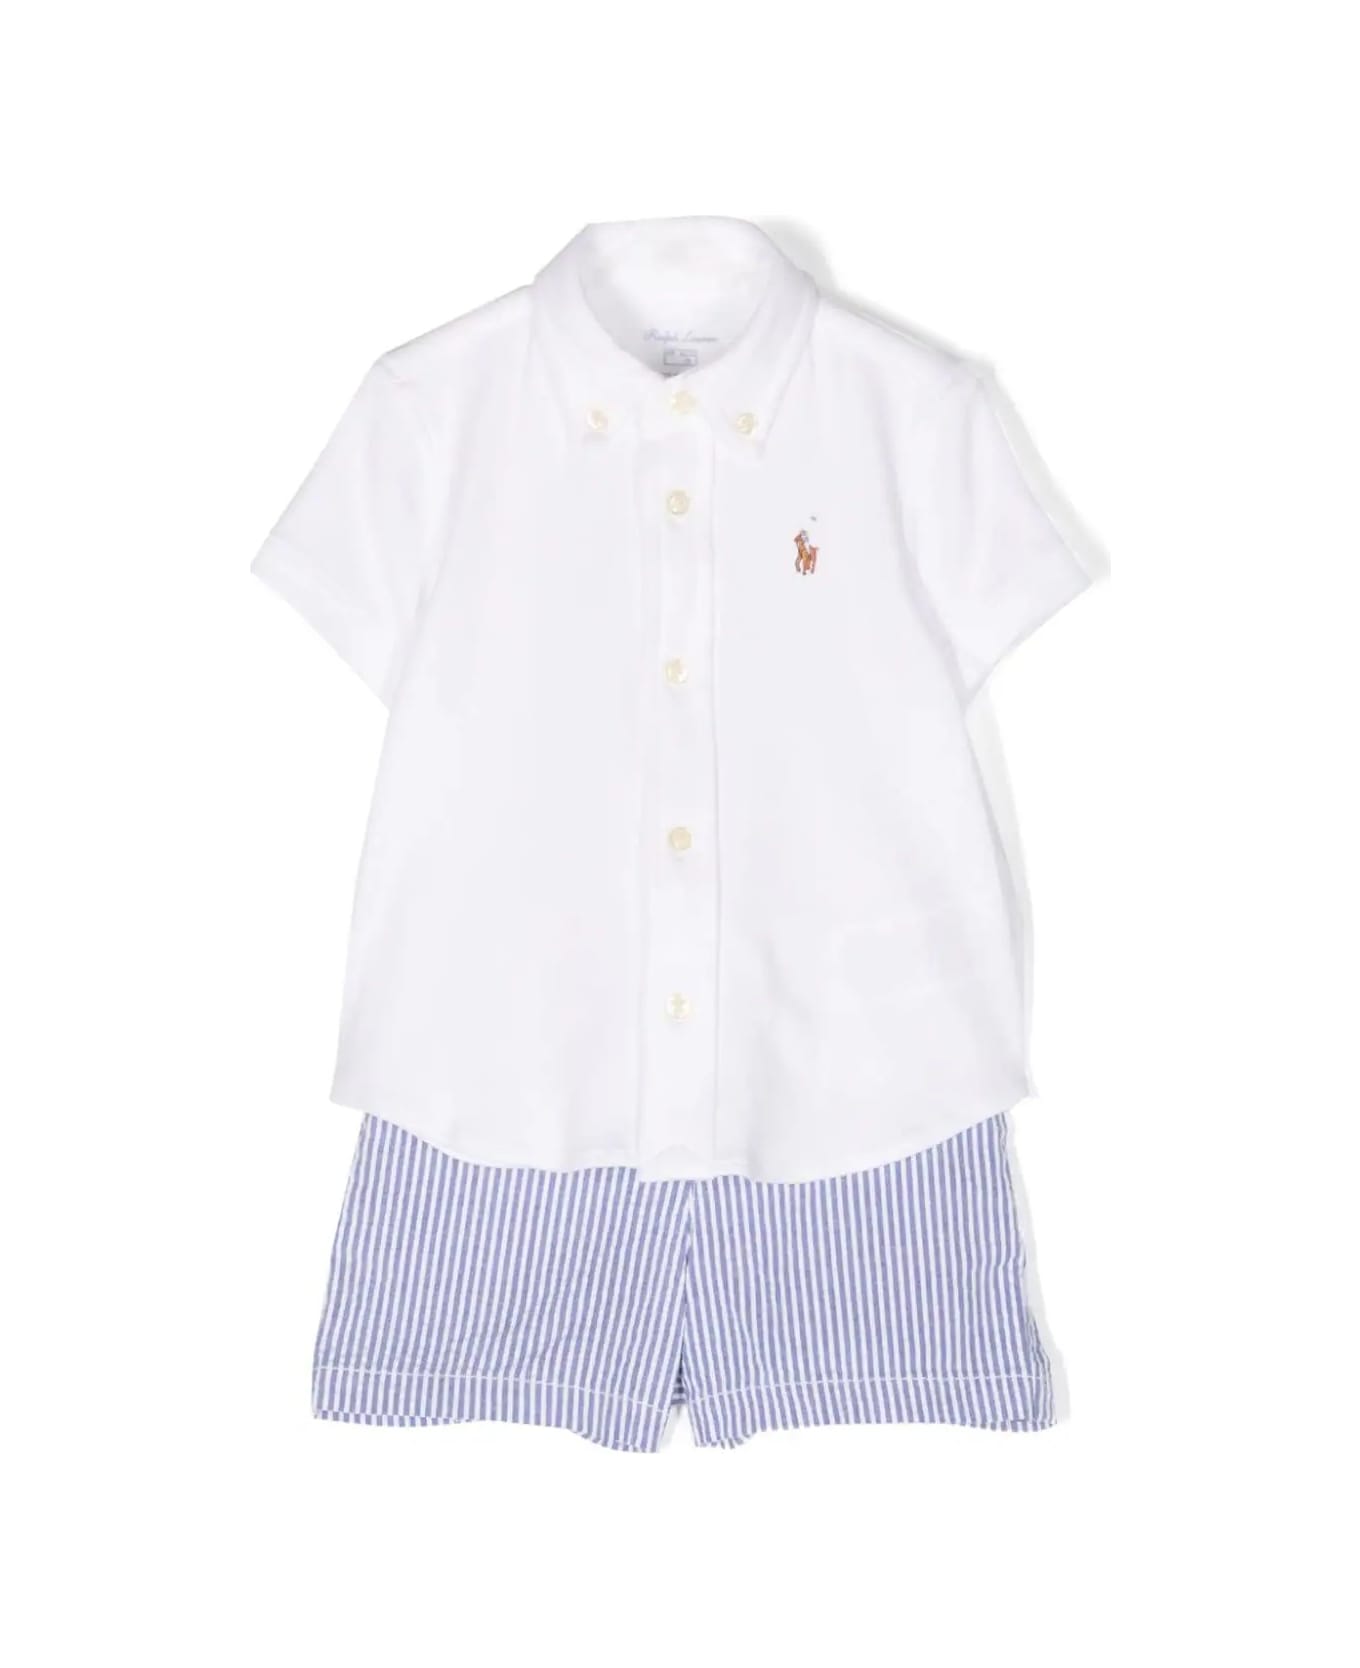 Ralph Lauren White And Light Blue Set With Shirt And Shorts - White ボディスーツ＆セットアップ